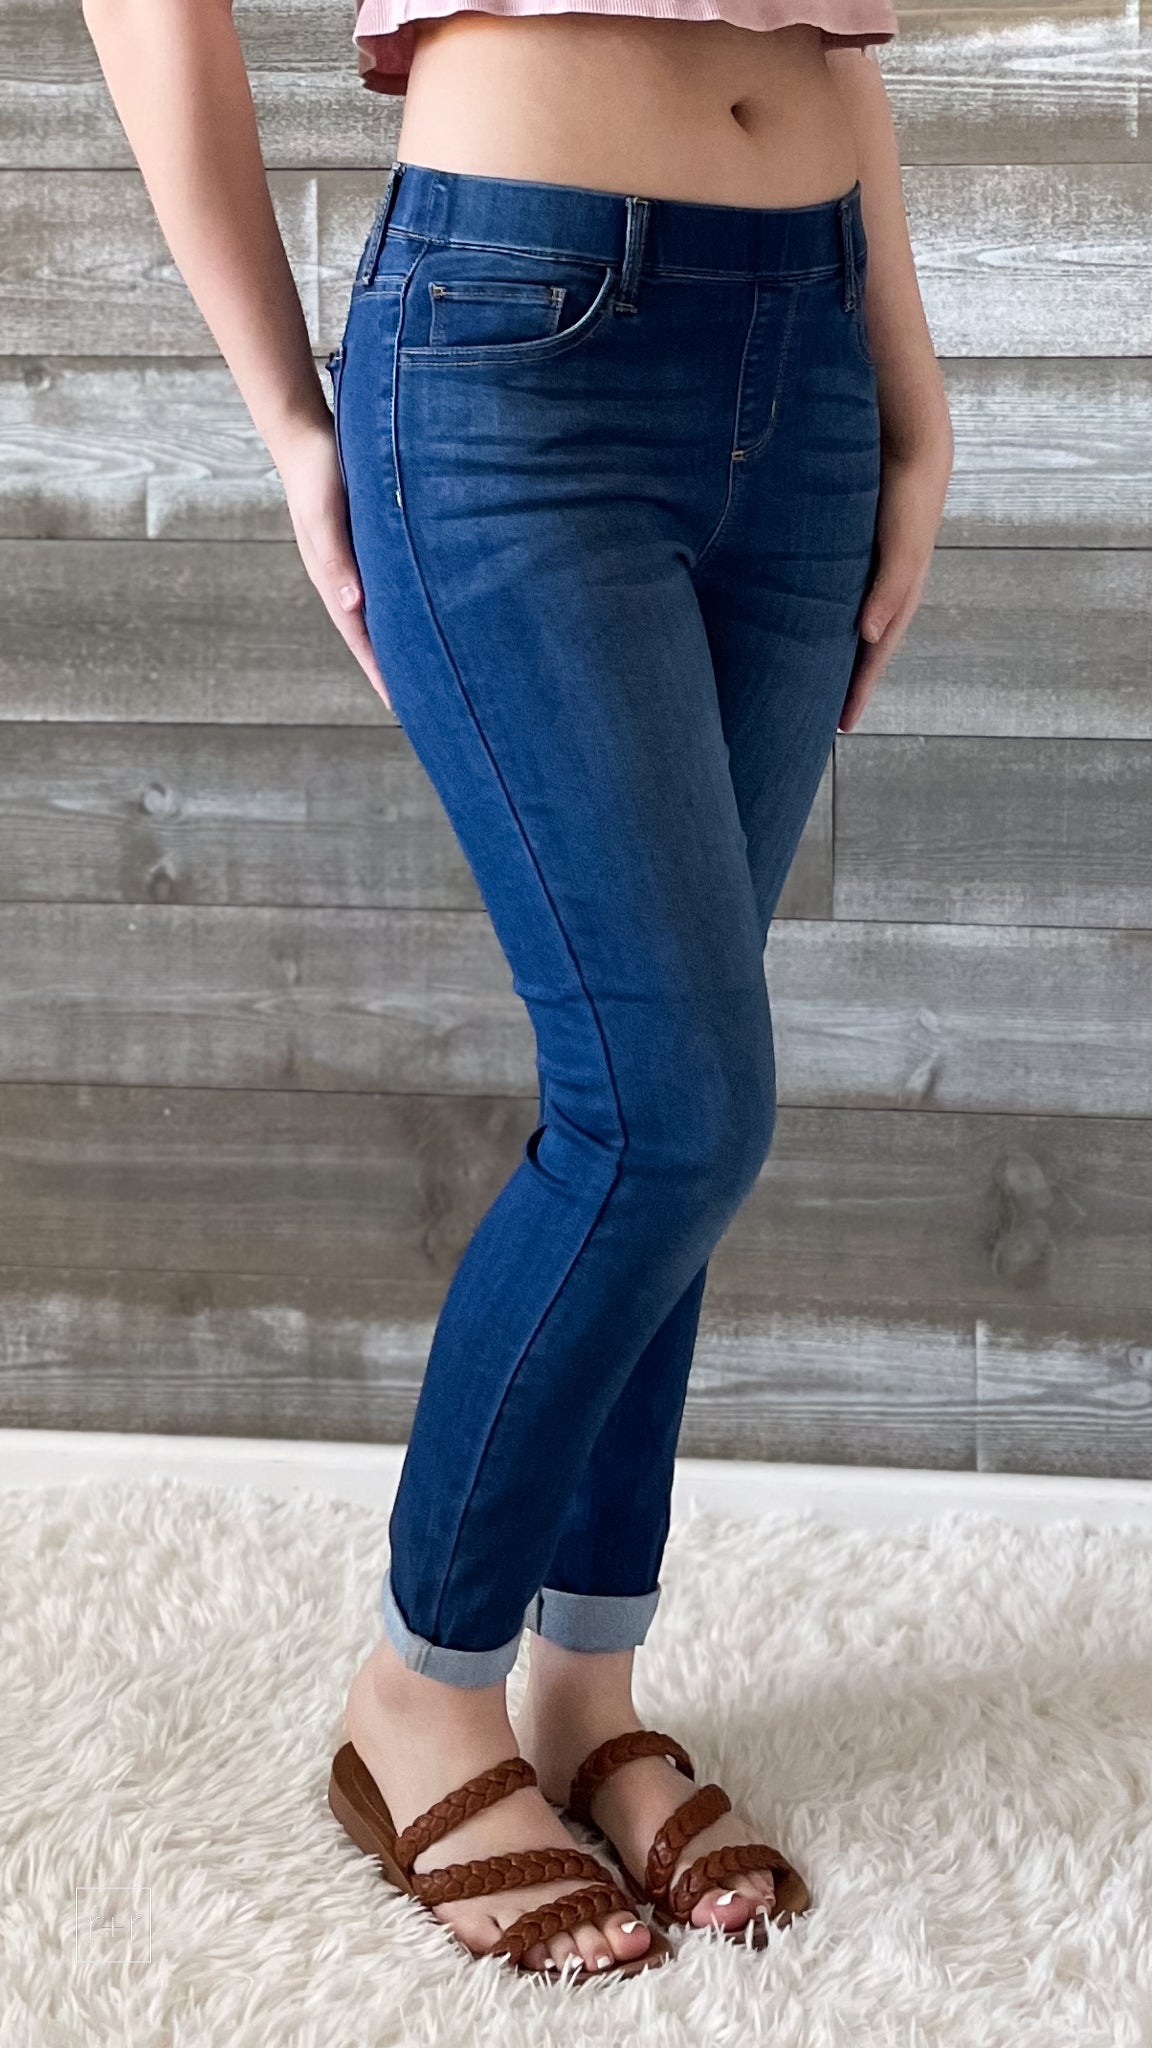 cello jeans pull on skinny crop mid rise jeans with rolled hem in medium wash AB76535M